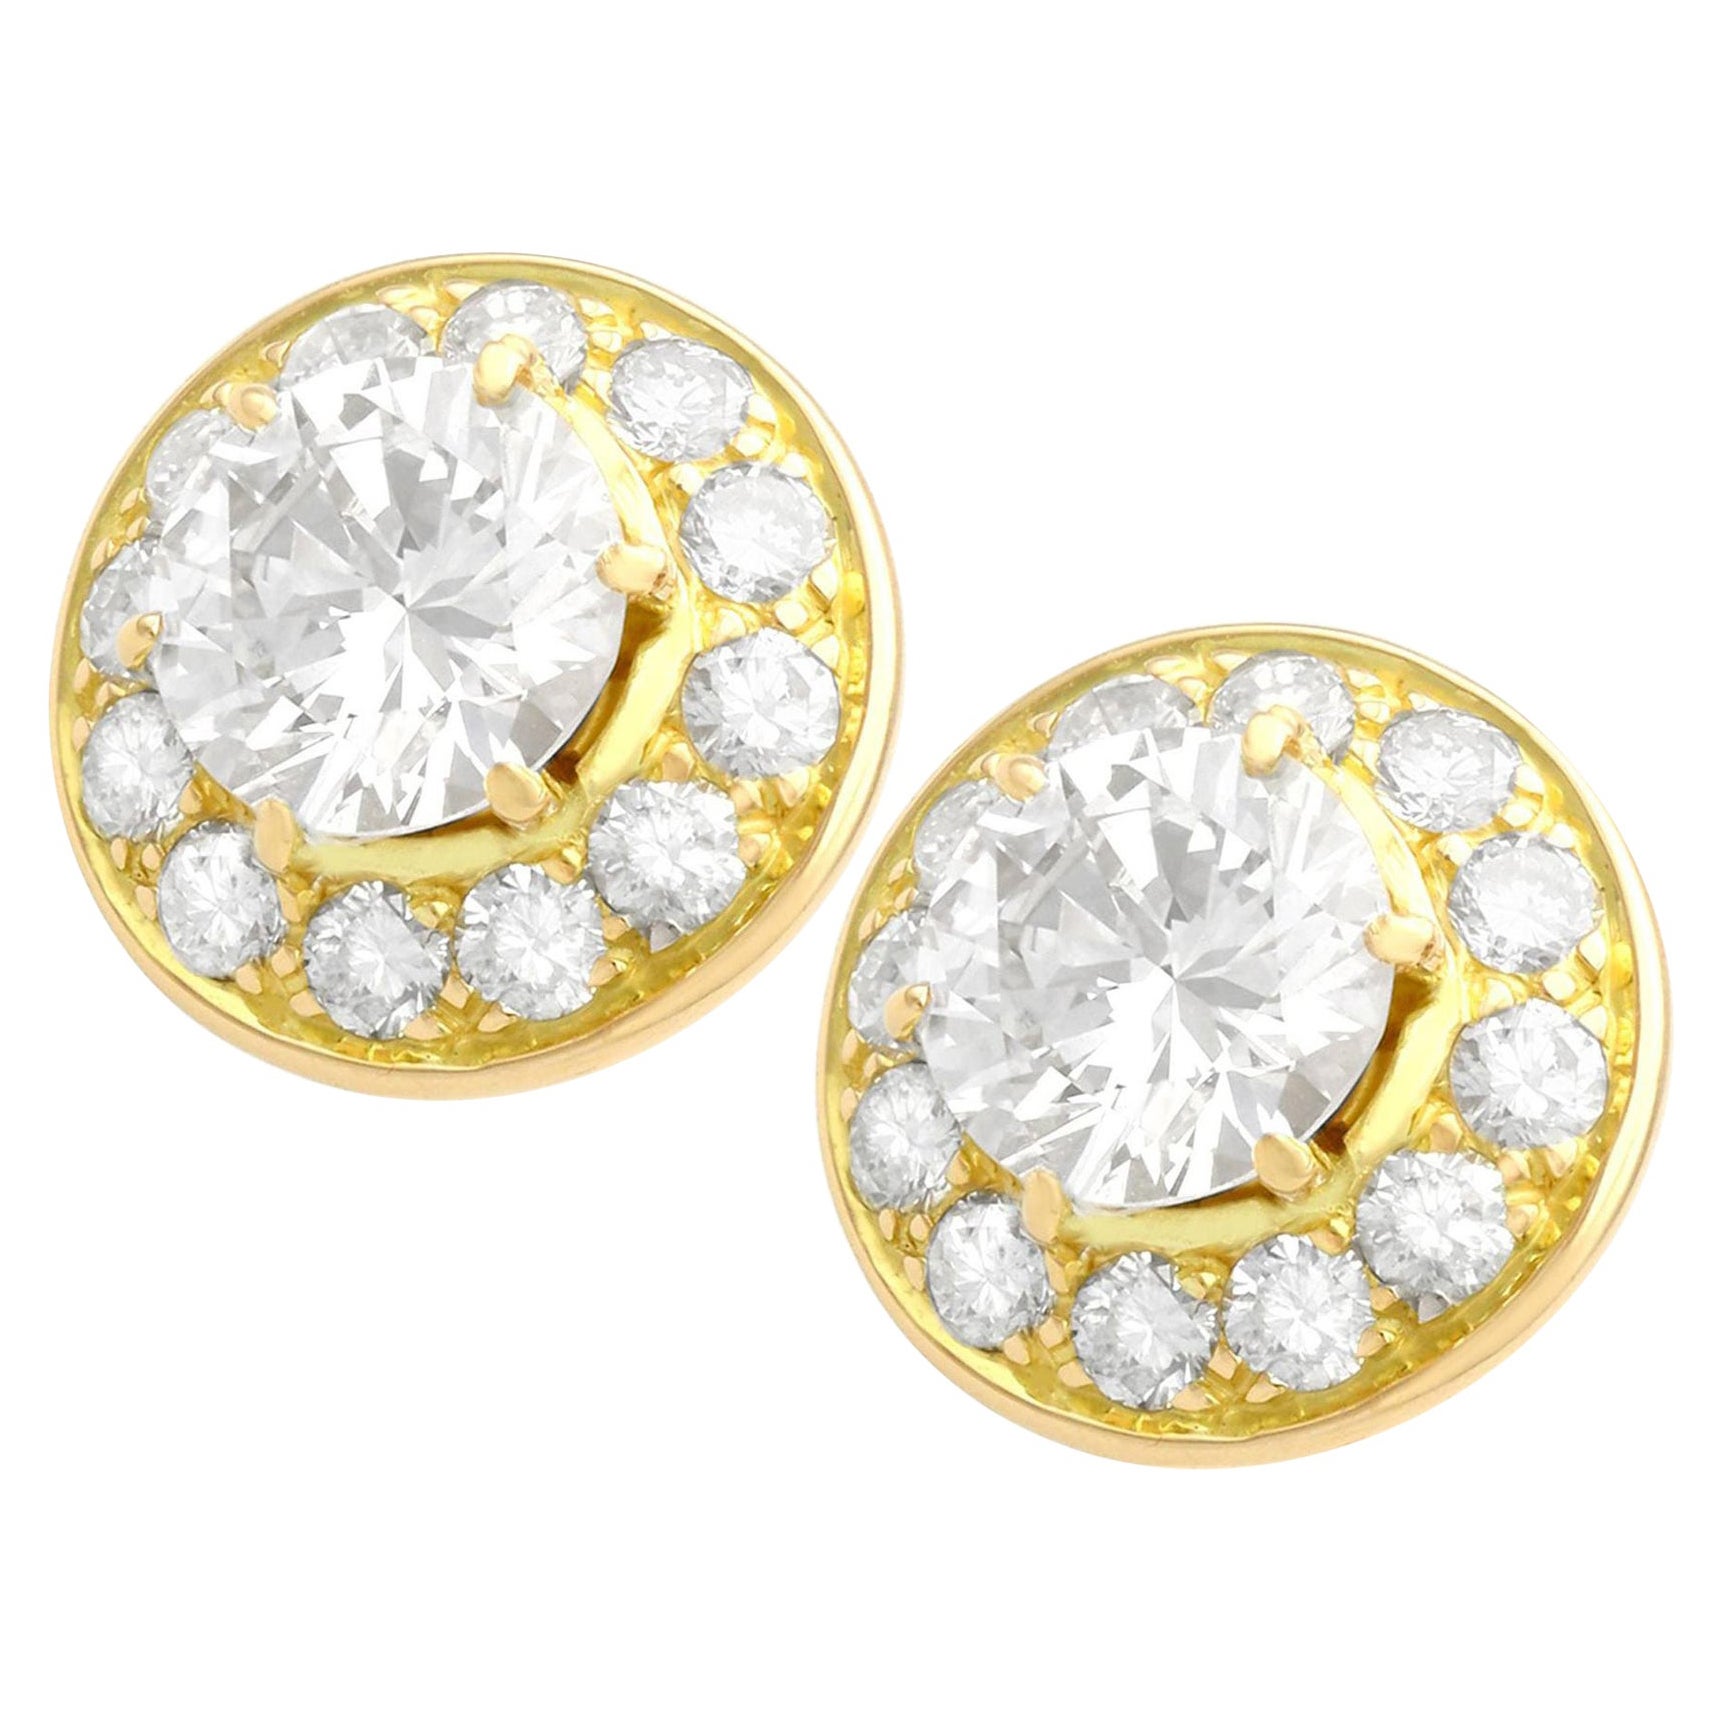 Vintage 2.65 Carat Diamond and 18k Yellow Gold Illusion Earrings For Sale